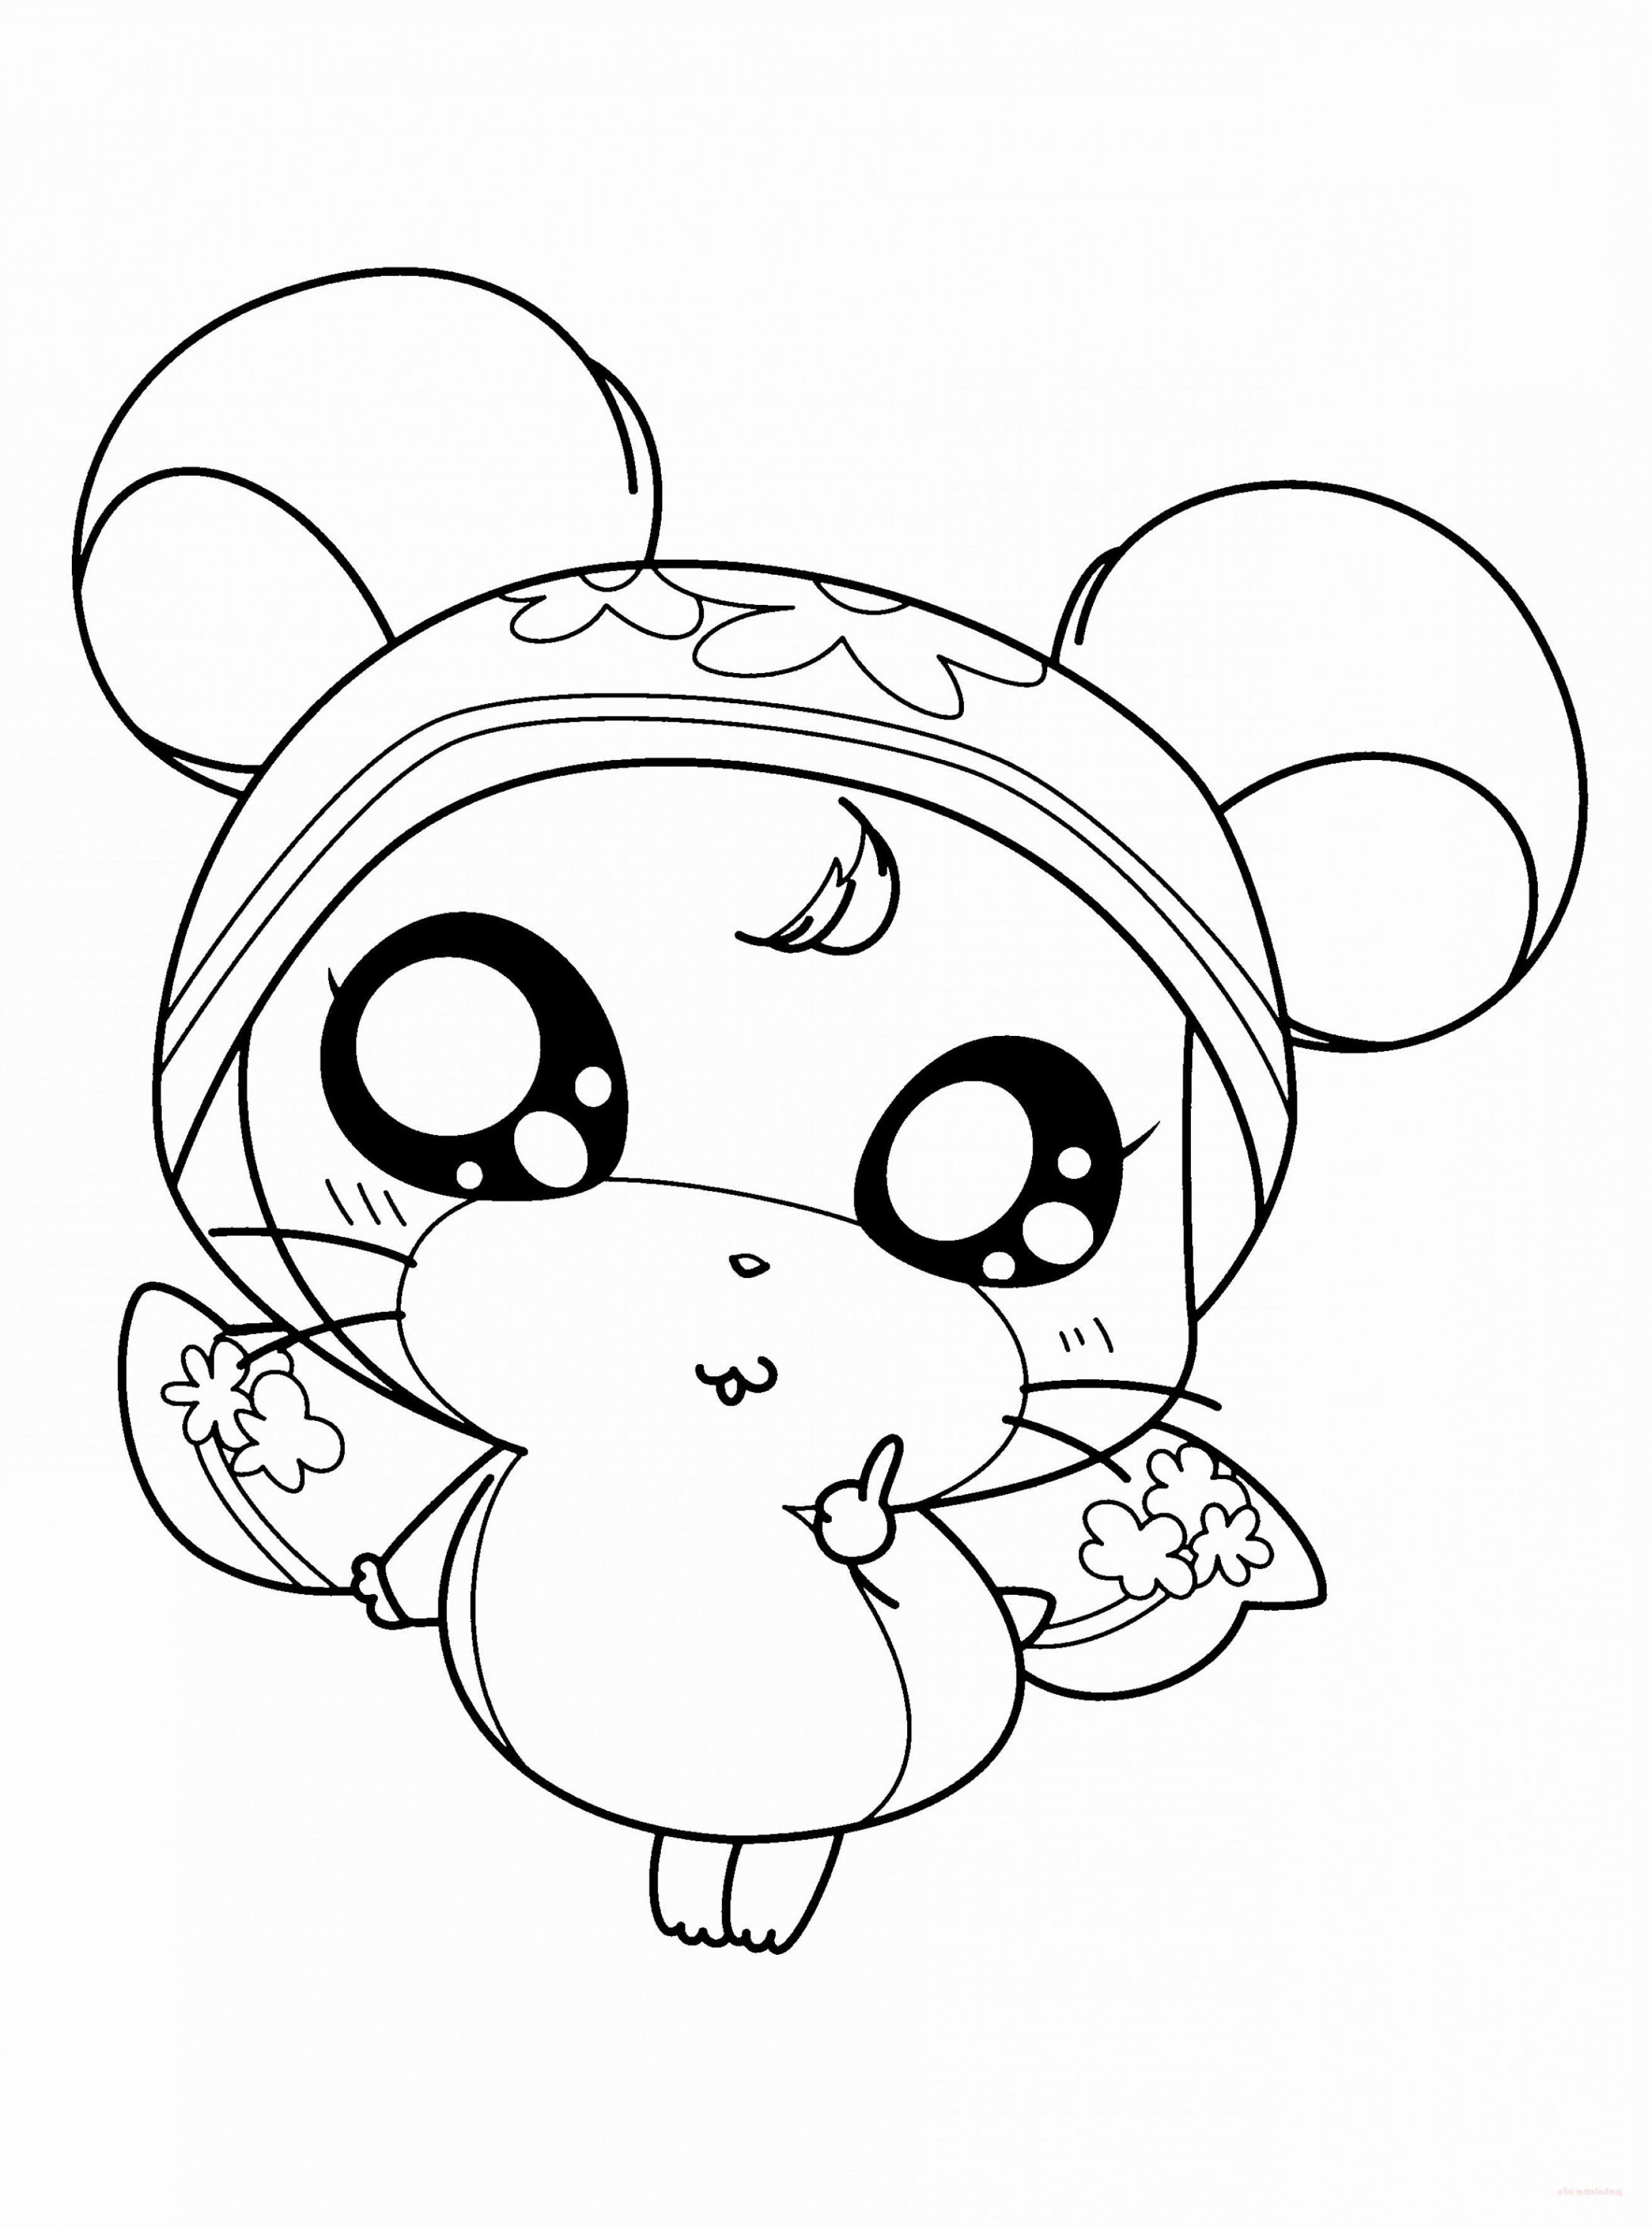 Coloring Pages Online To Print Coloring Coloring Book Online Disney Coloring Pages Online